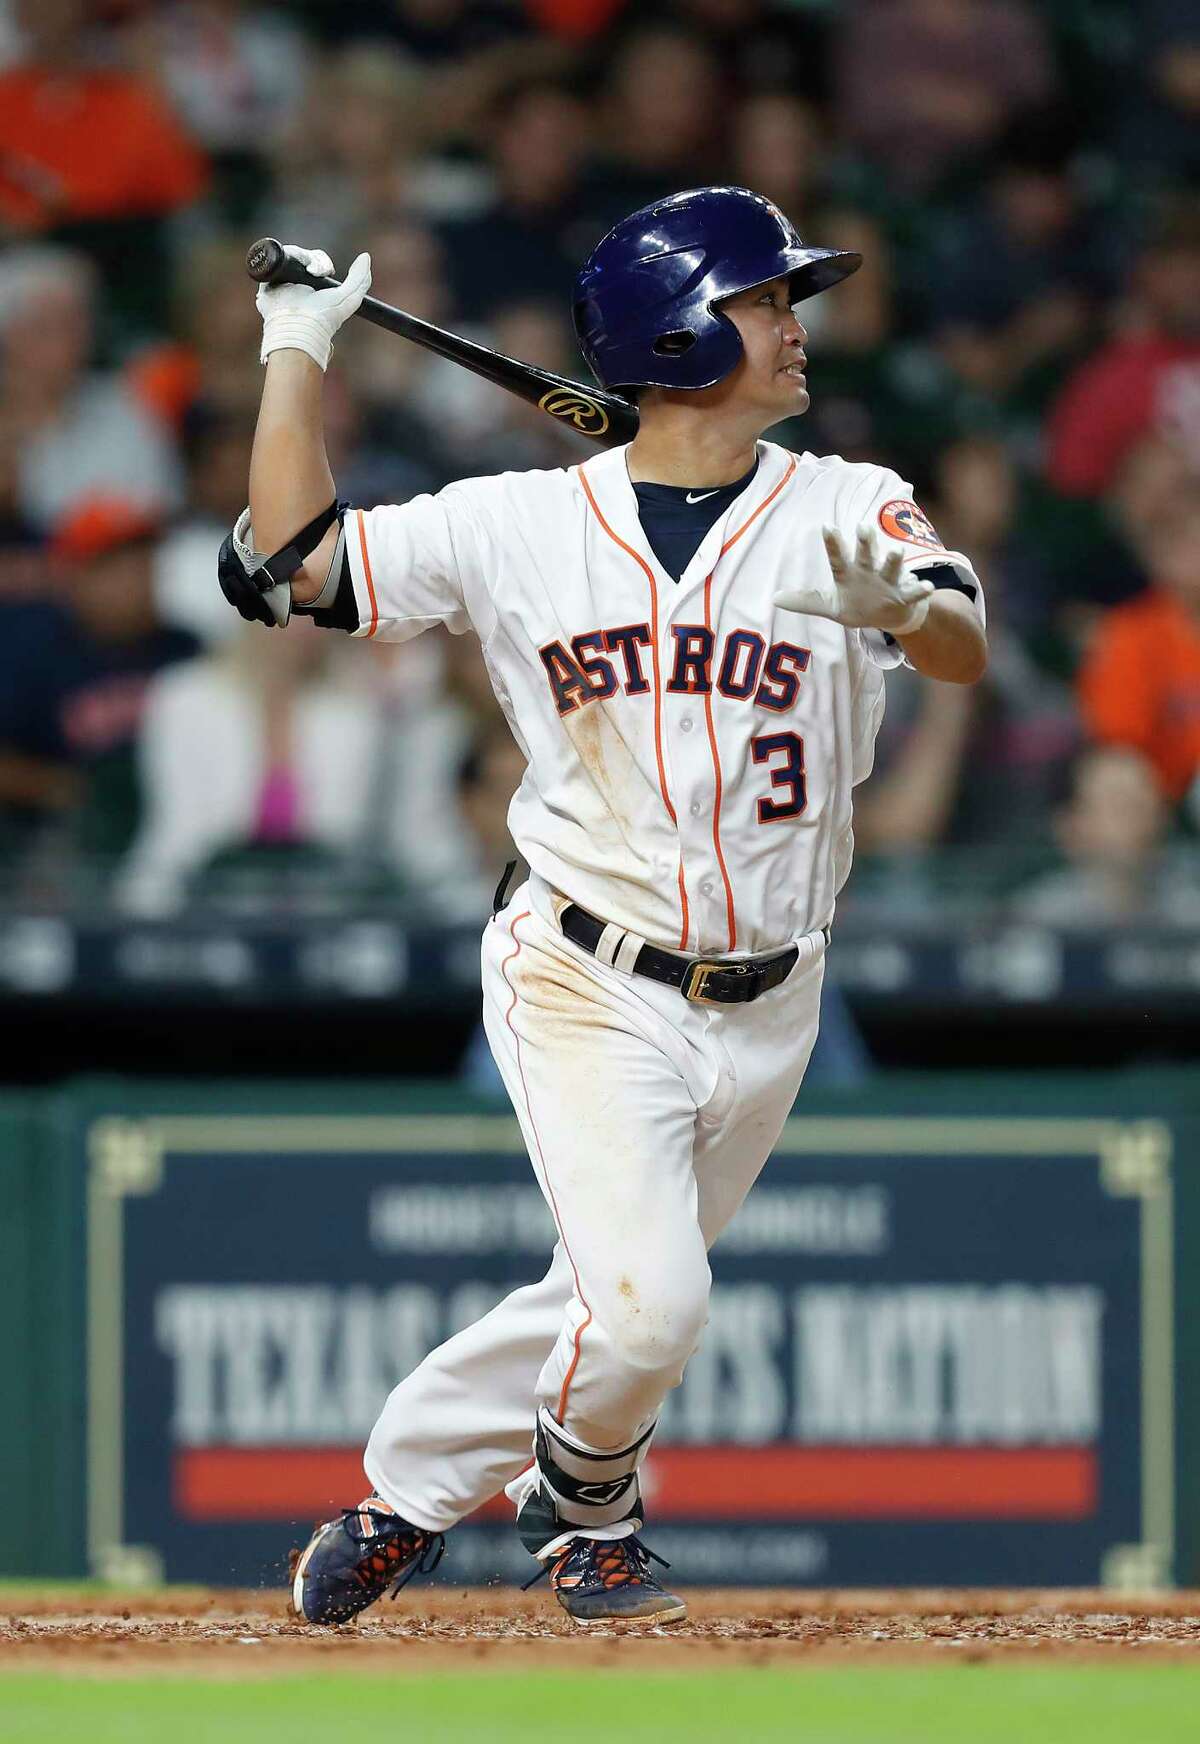 Houston Astros Norichika Aoki (3) singles during the seventh inning of an MLB baseball game at Minute Maid Park, Tuesday, April 18, 2017, in Houston.